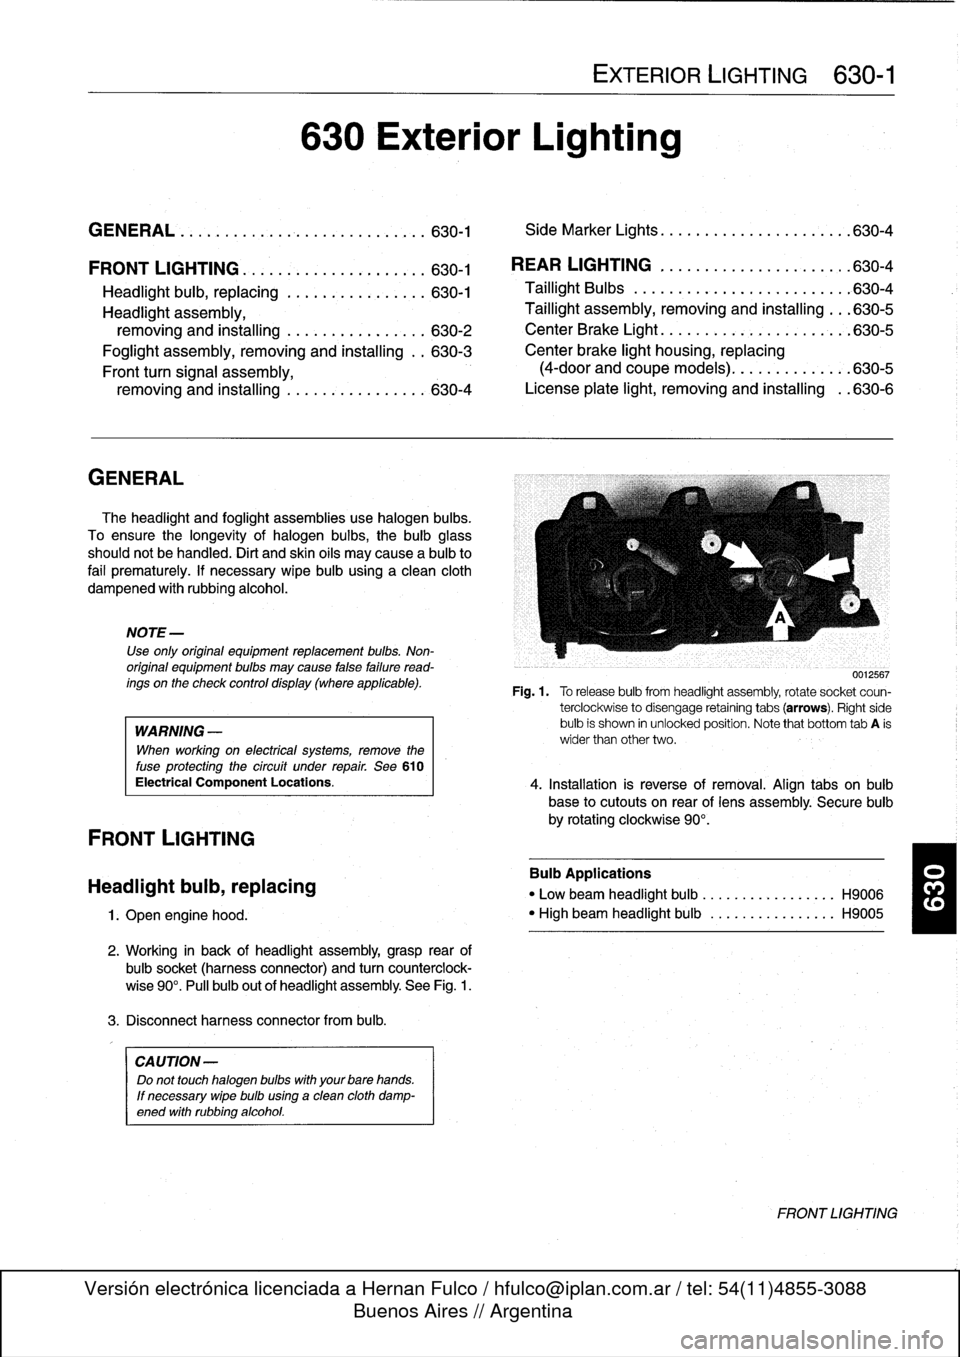 BMW 318i 1995 E36 Workshop Manual 
FRONT
LIGHTING
.
...........
.
....
.
.
.
.
630-1

Headlight
buib,
replacing
............
.
.
.
.
630-1
Headlight
assembly,

removing
and
installing
.......
.
....
.
.
.
.
630-2

Foglight
assembly,
r